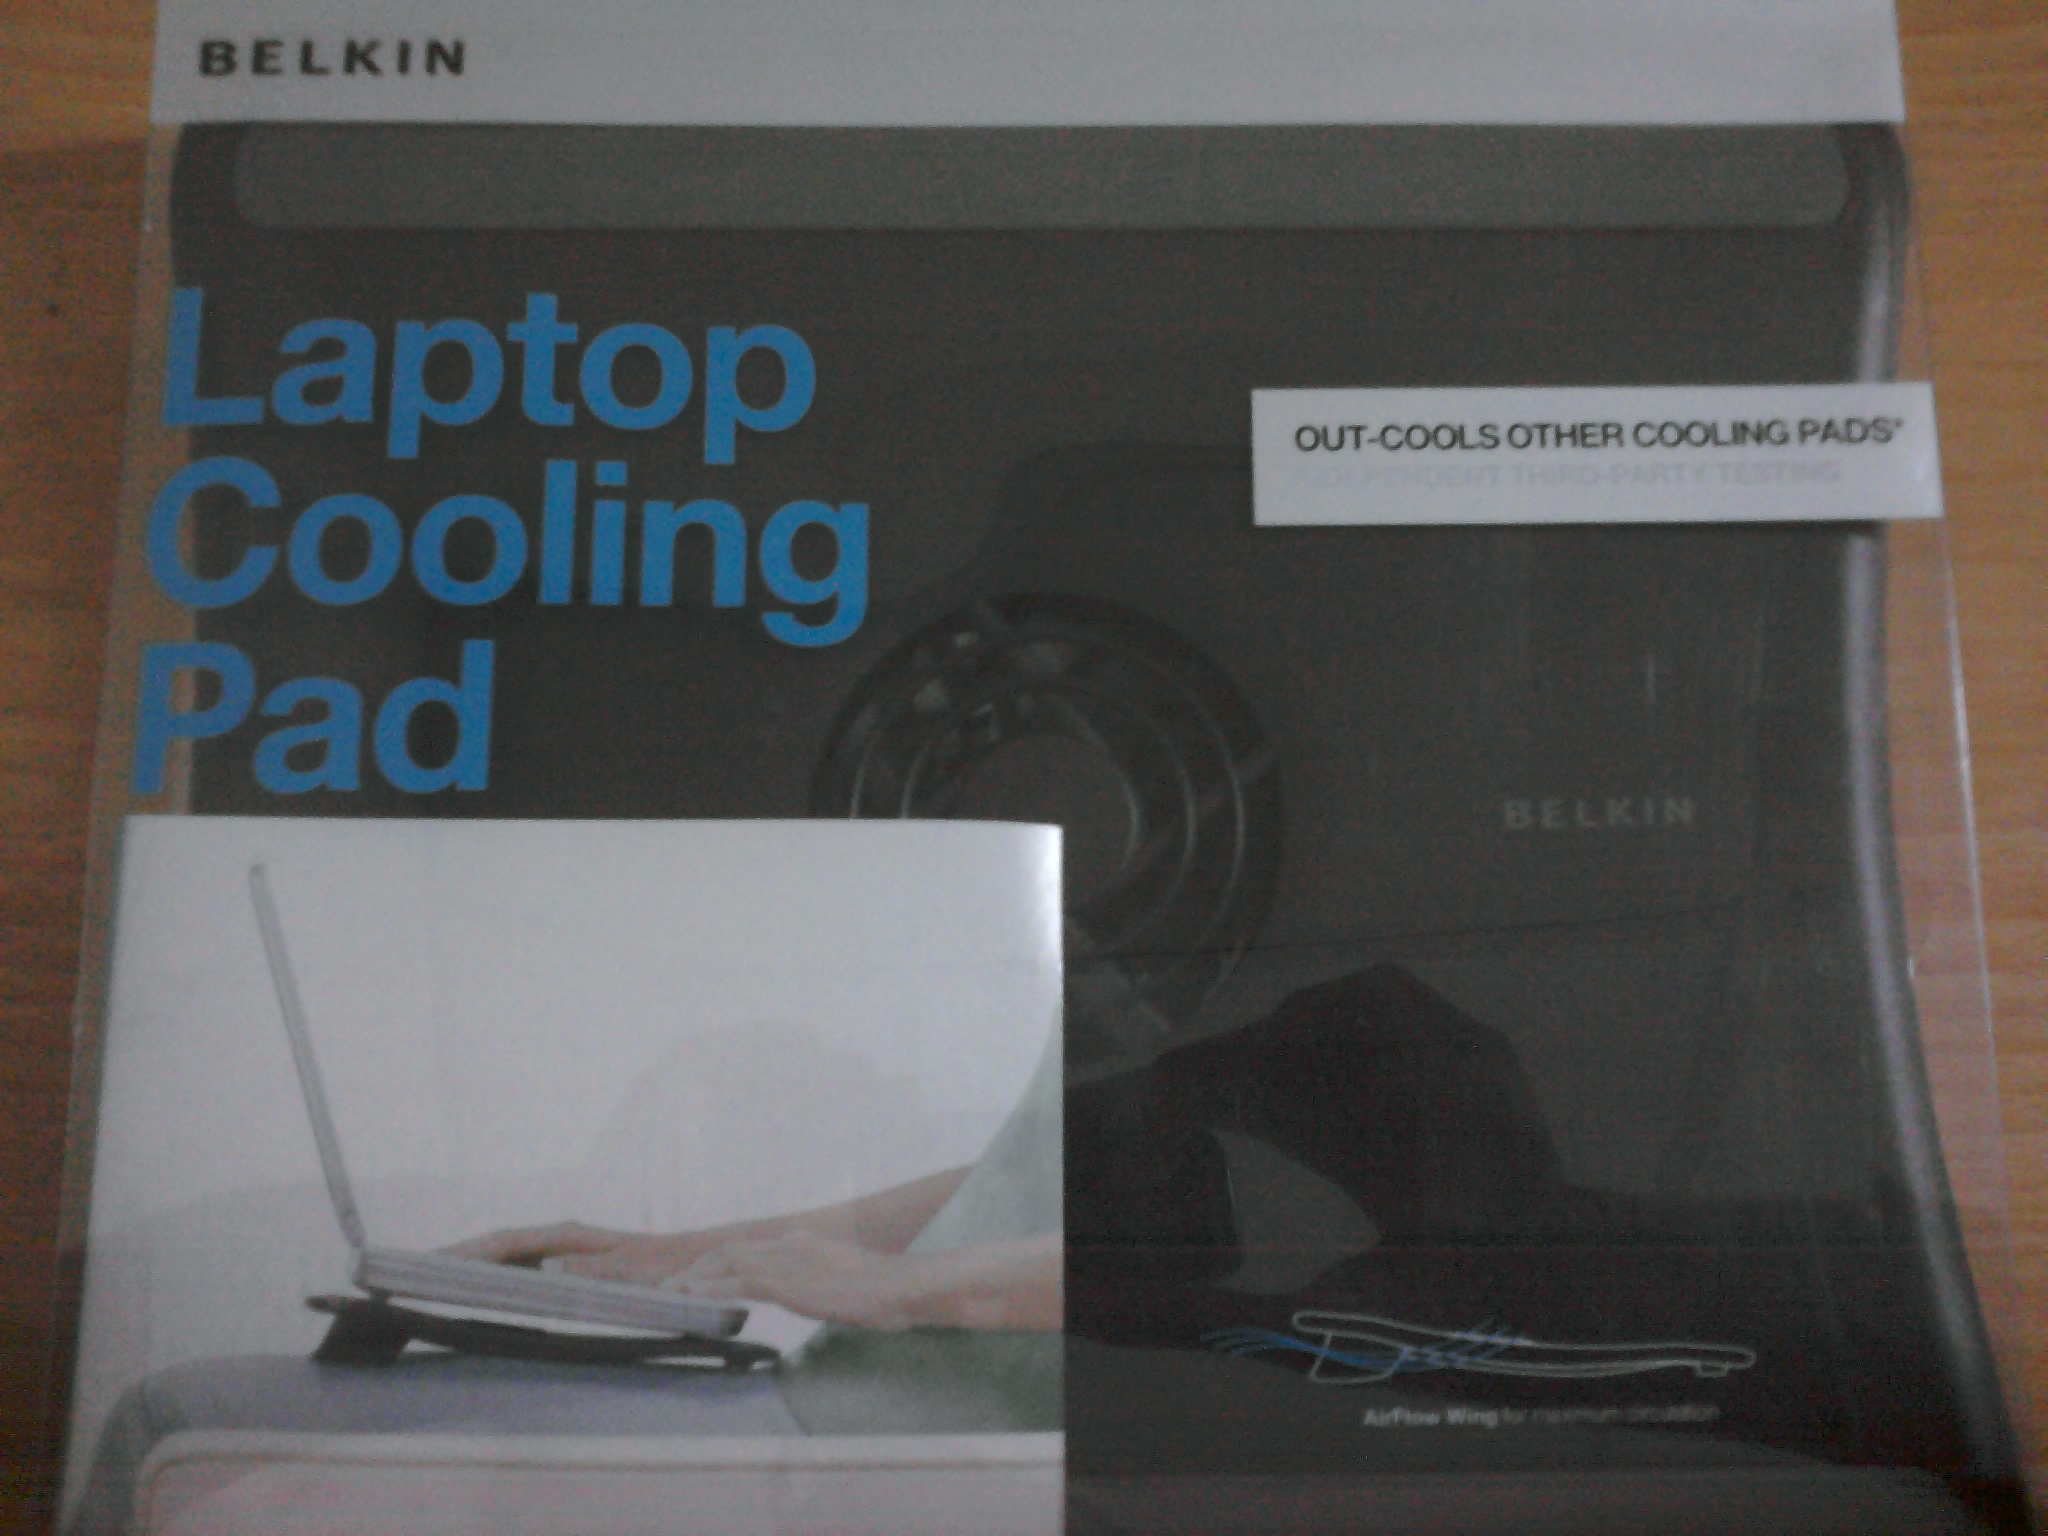 Belkin Laptop Cooling Pad _out-cools other cooling pads new  large image 0